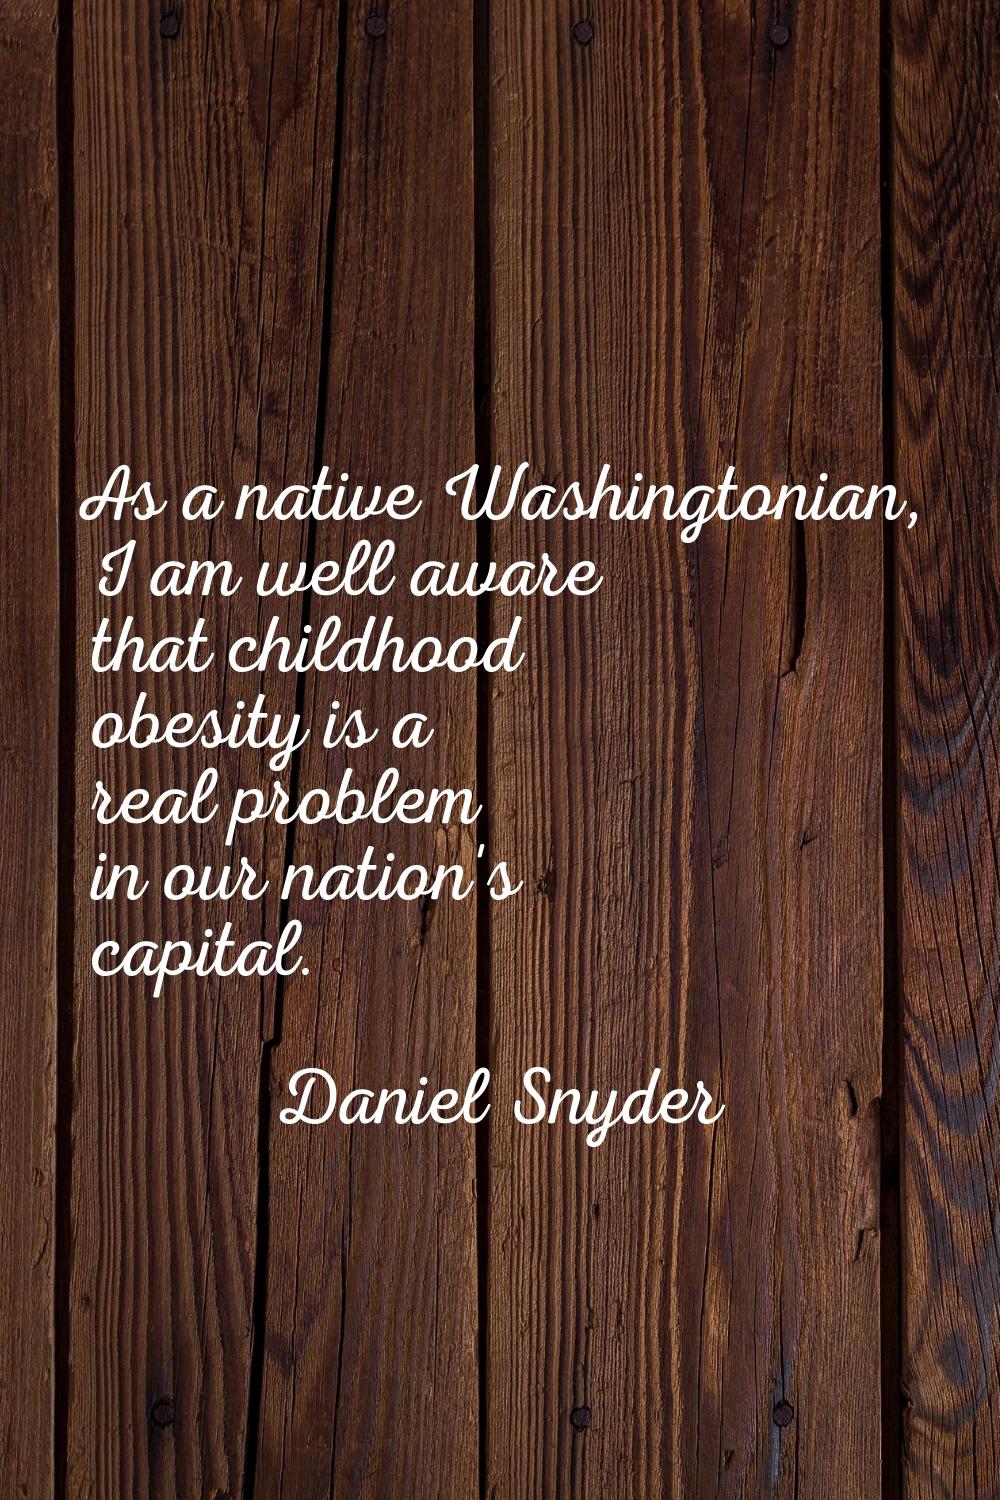 As a native Washingtonian, I am well aware that childhood obesity is a real problem in our nation's